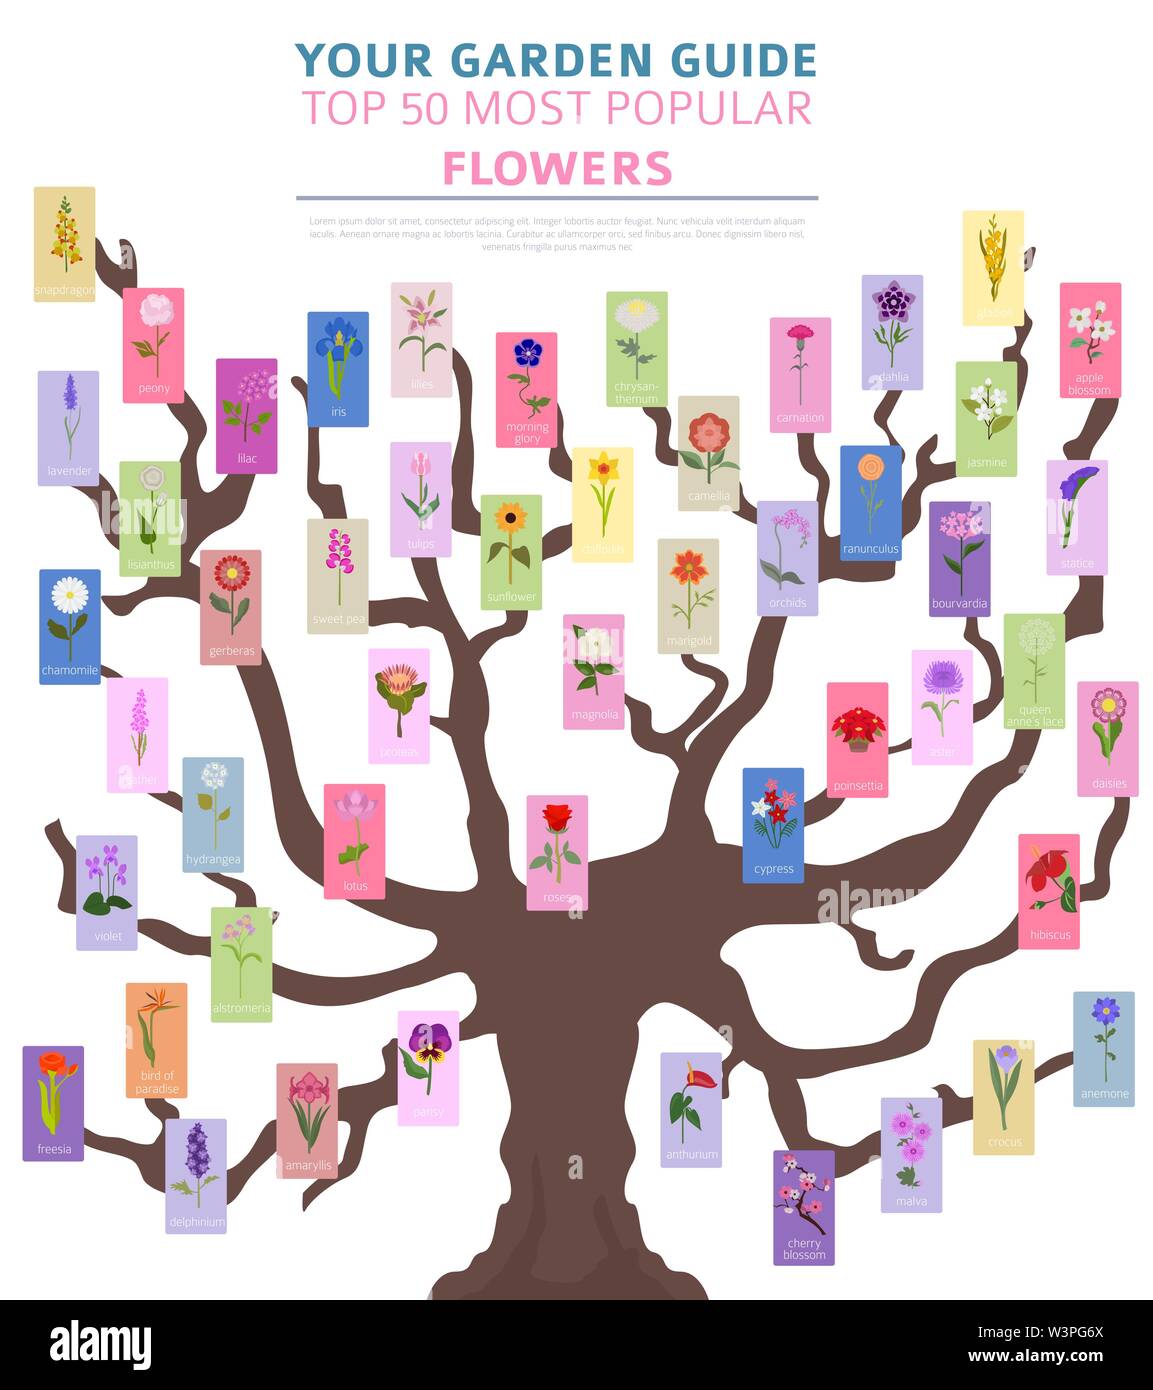 Your garden guide. Top 50 most popular flowers infographic. Vector illustration Stock Vector